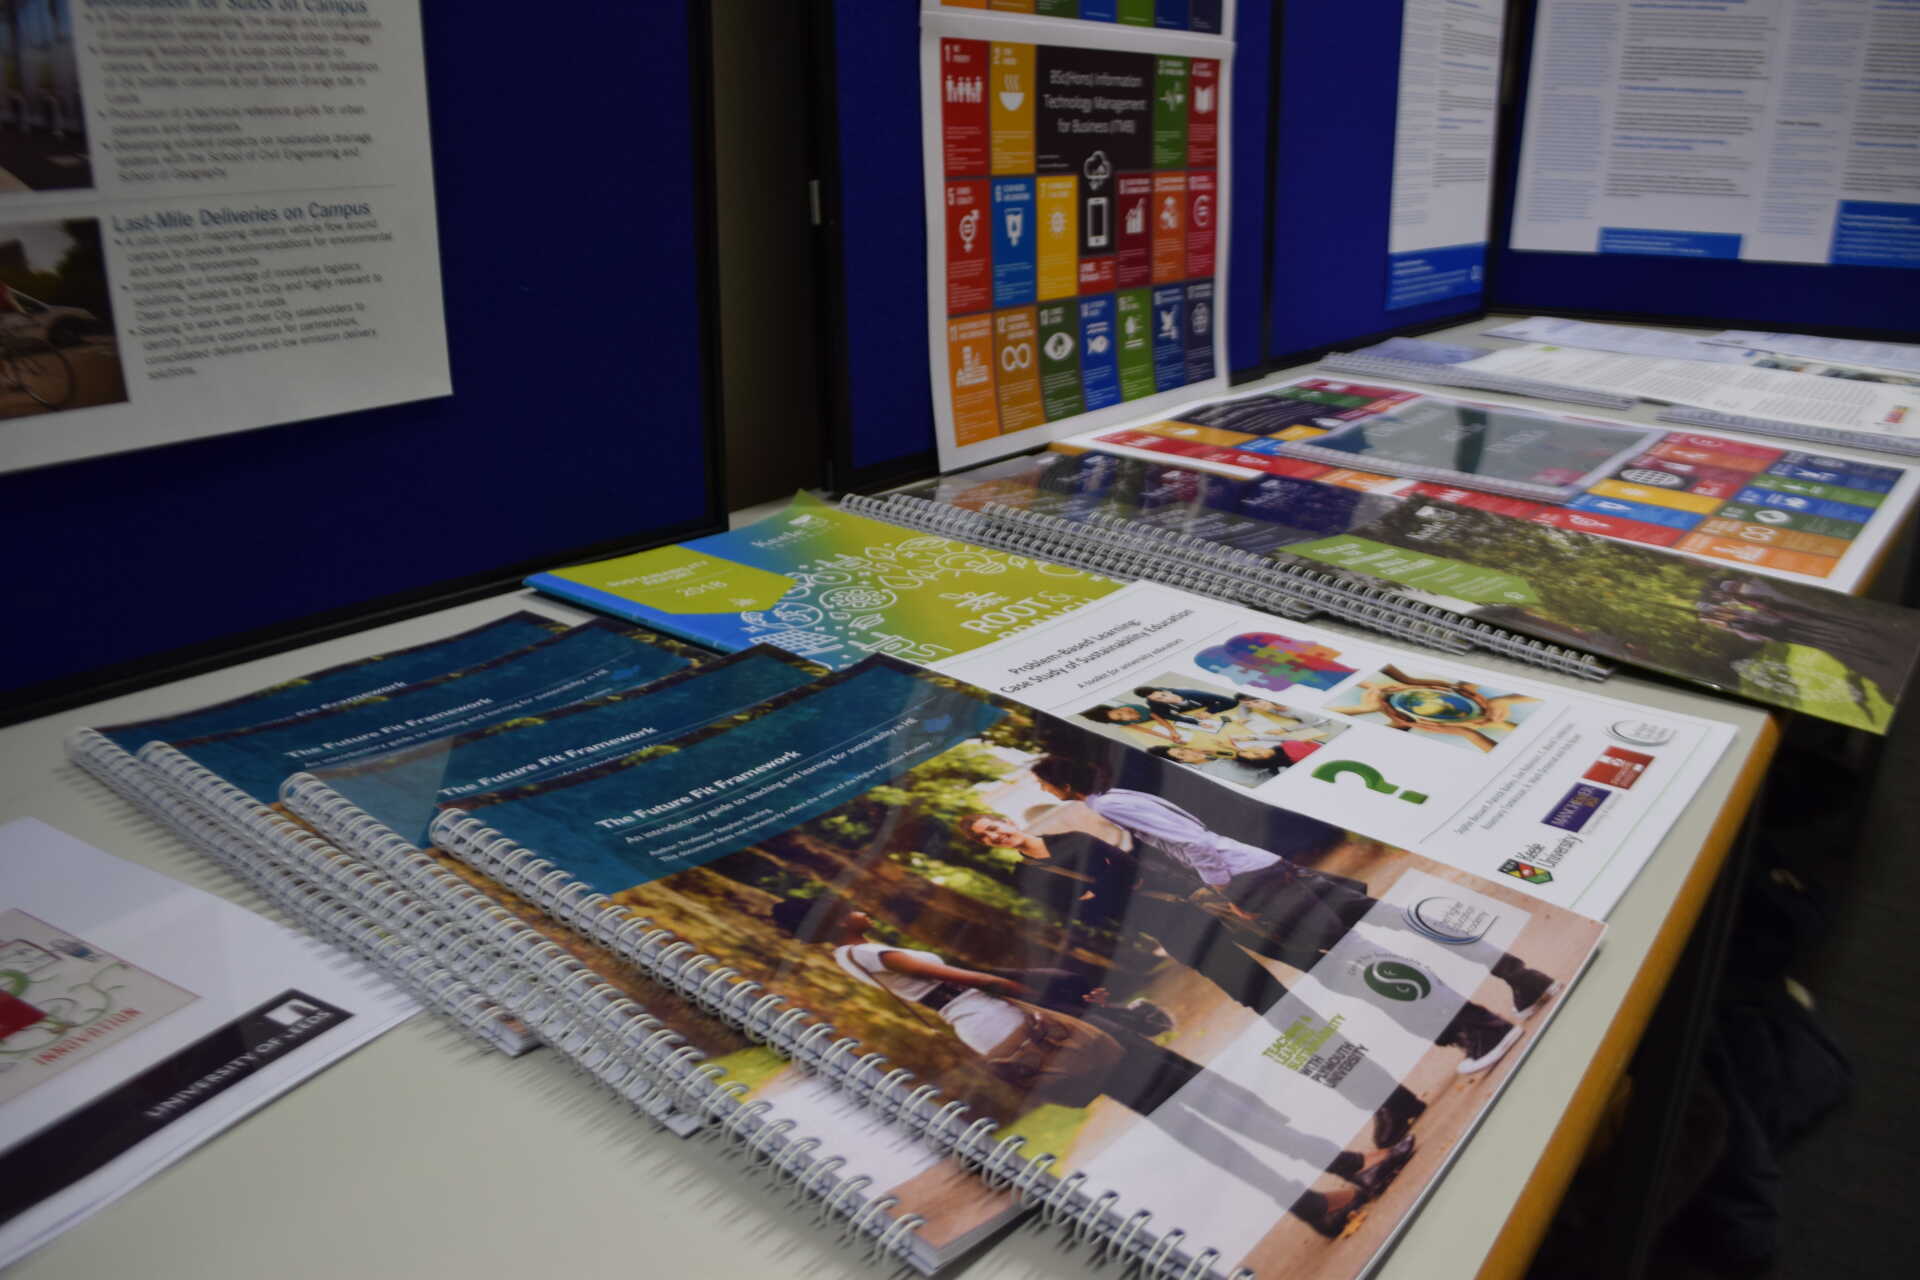 A table filled with brochures and leaflets about education for sustainable development